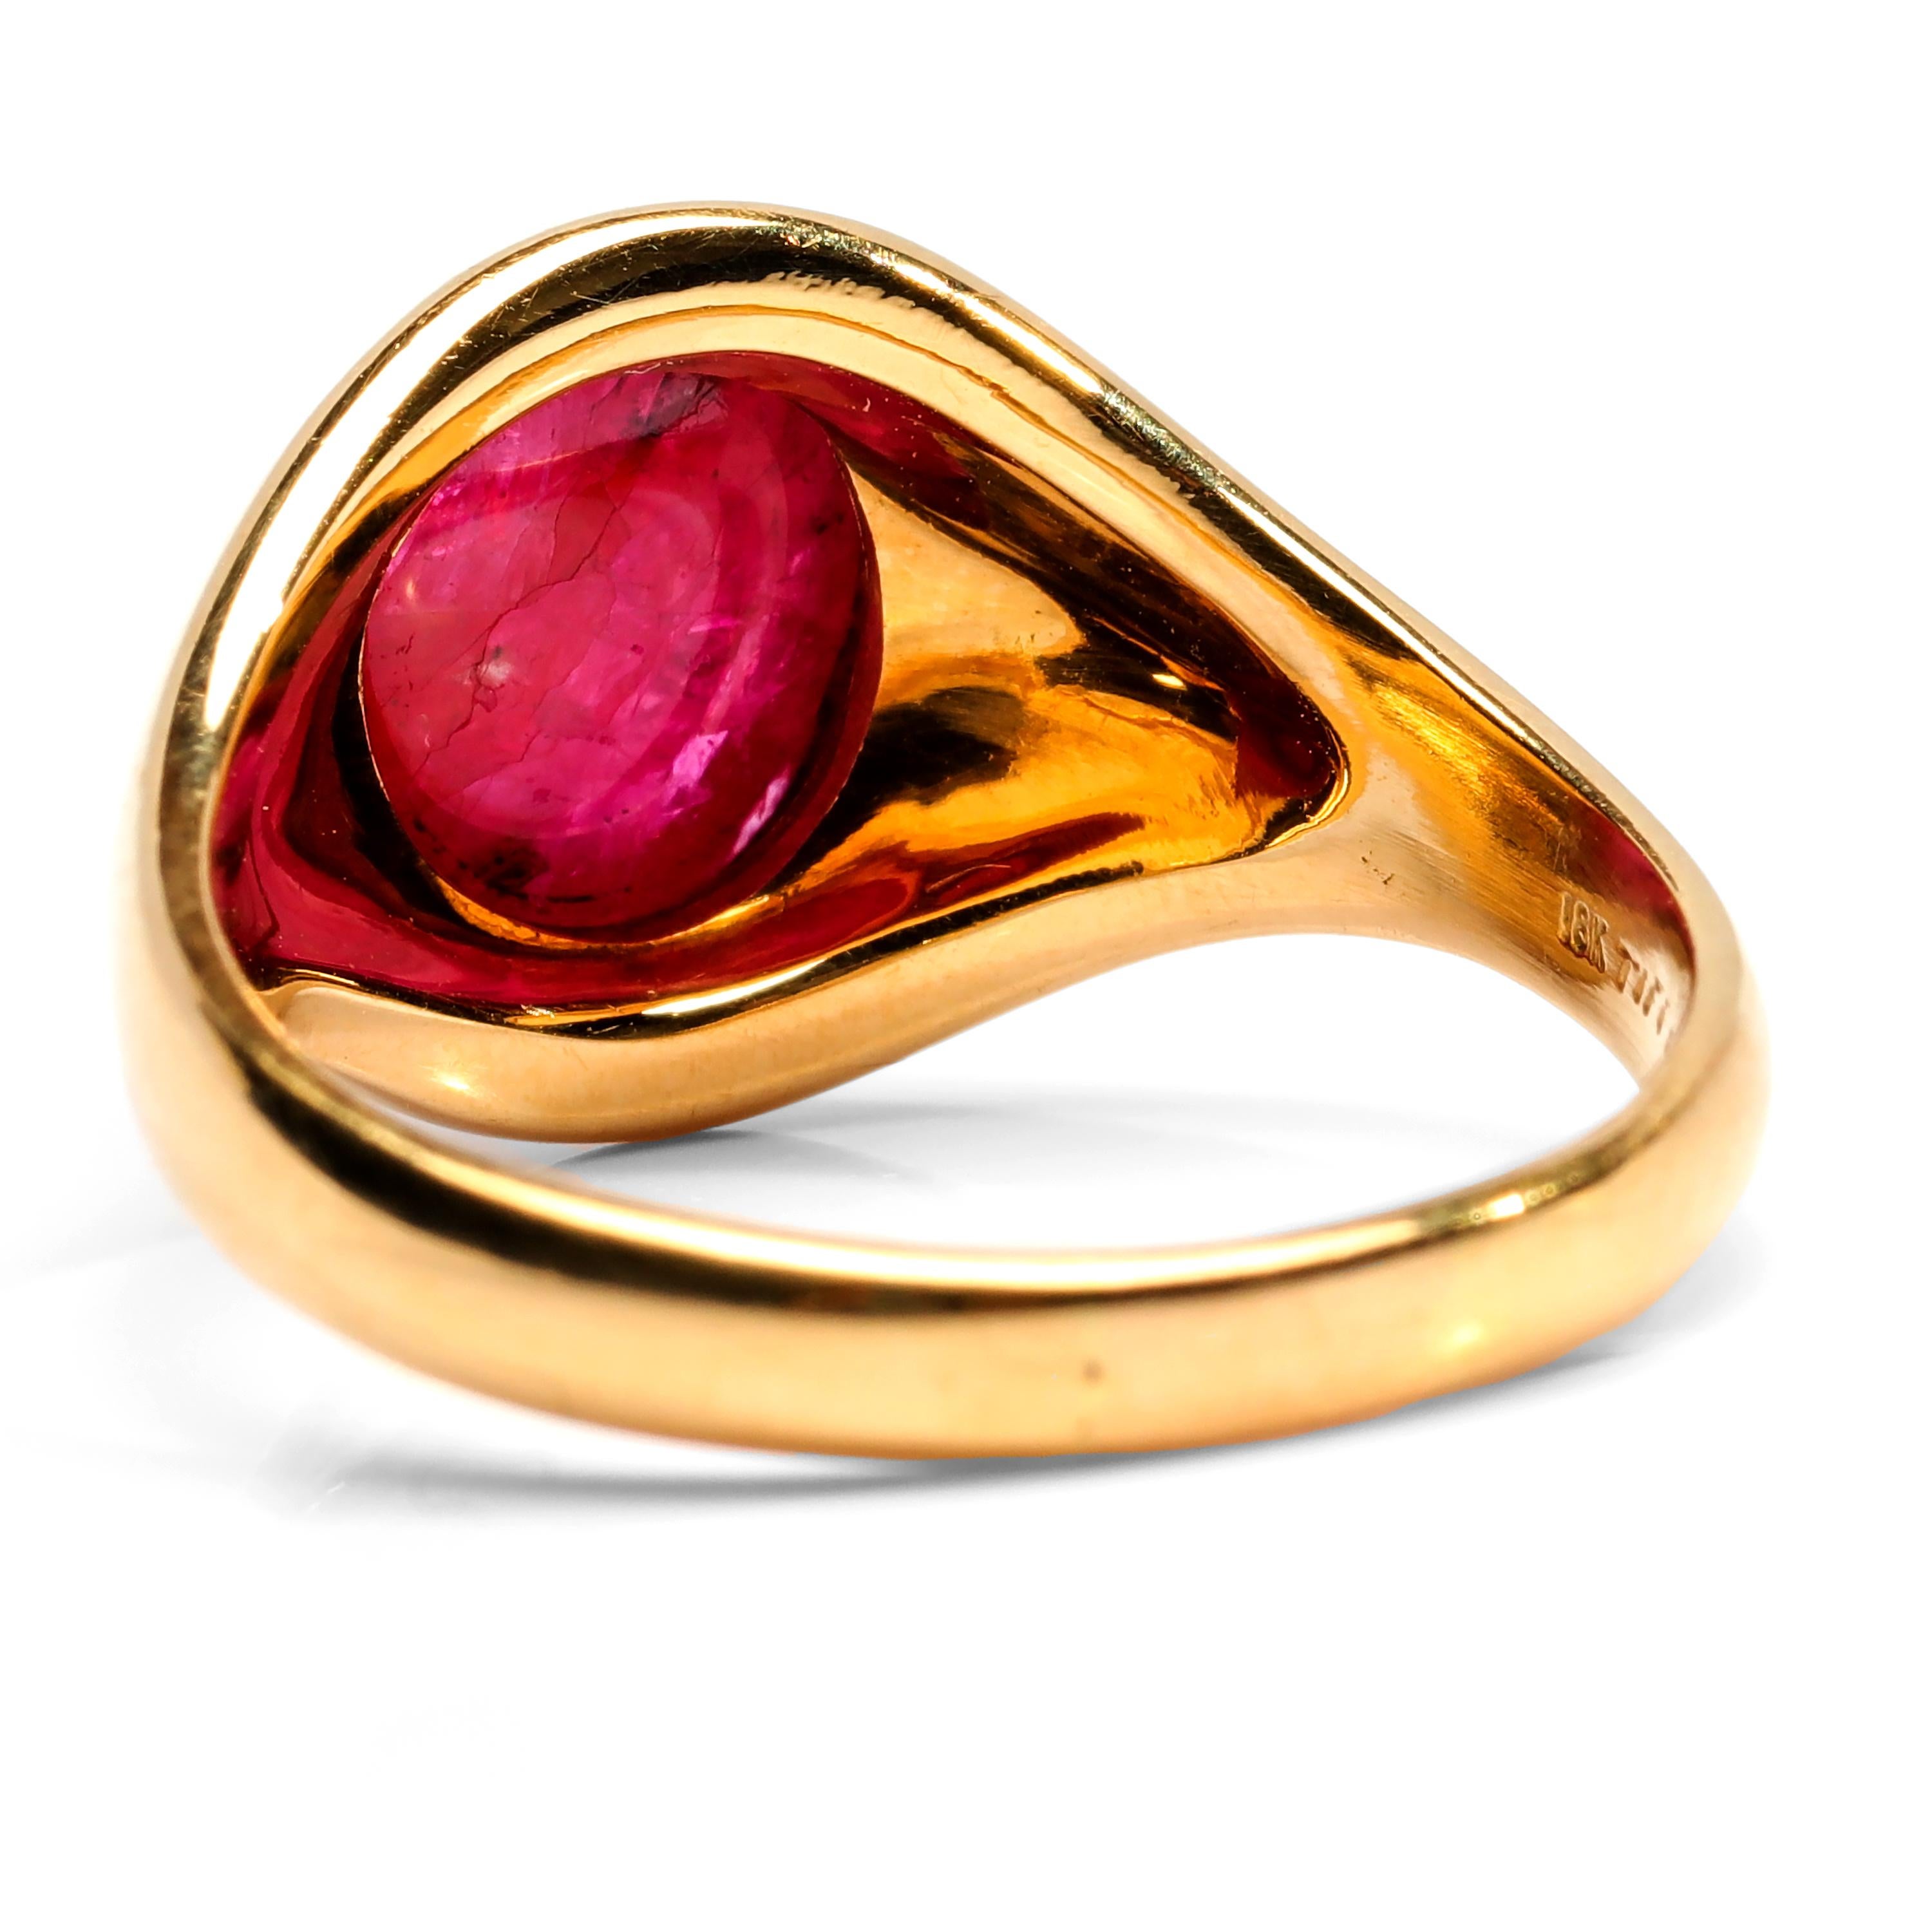 Cabochon Ruby Ring by Tiffany & Co. Midcentury